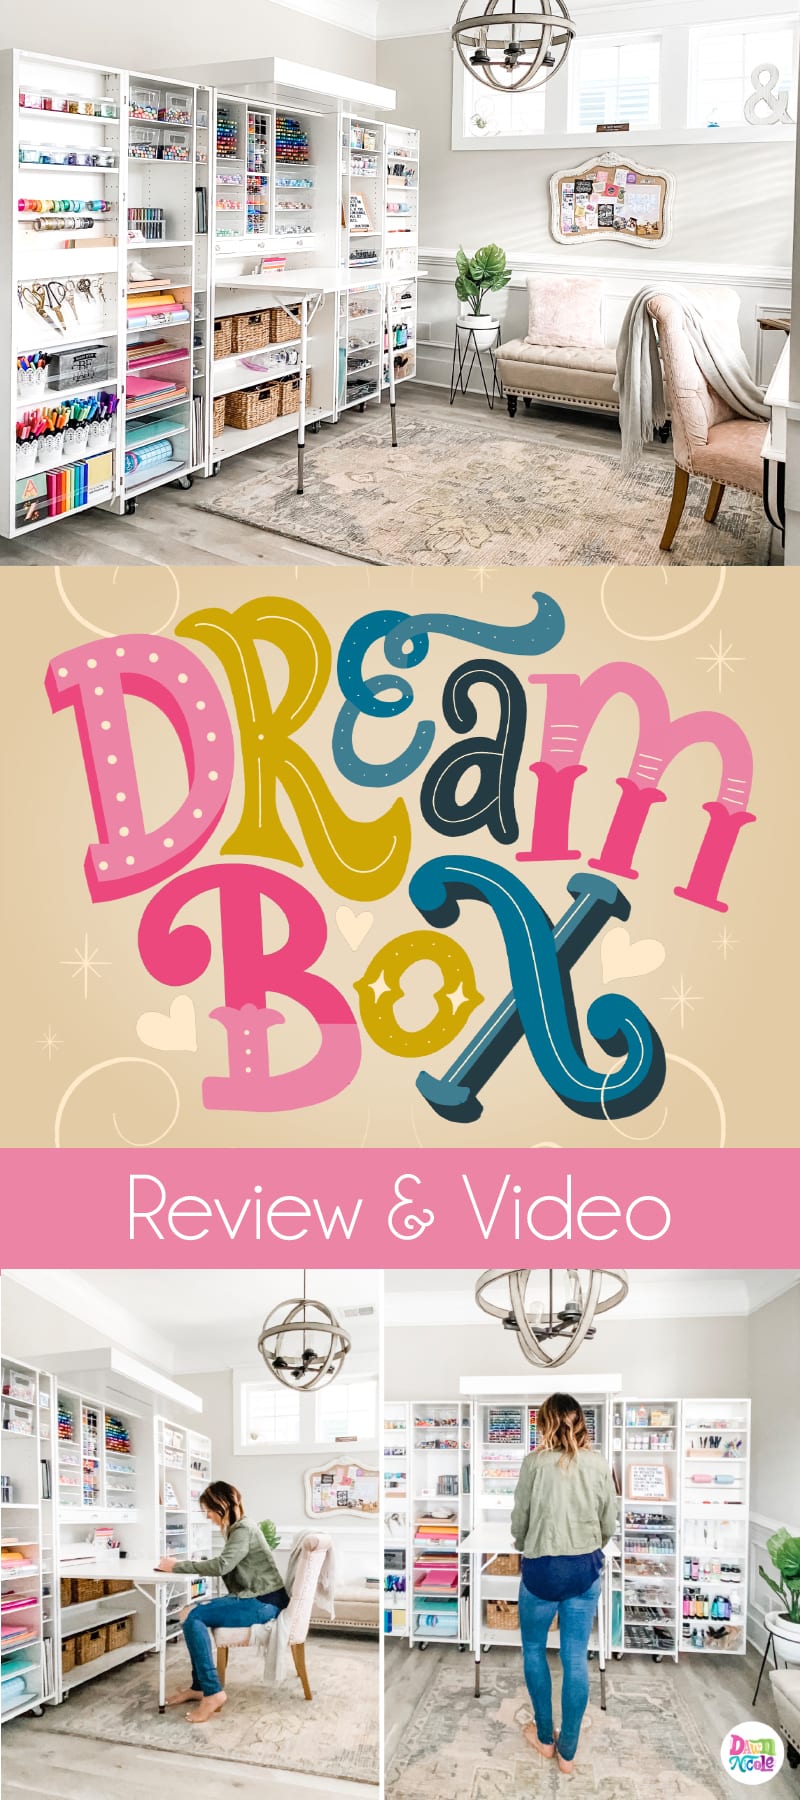 The Original ScrapBox DreamBox Review. The DreamBox is serious organization goals, but is it as dreamy as it appears? Find out in my blog post and video!